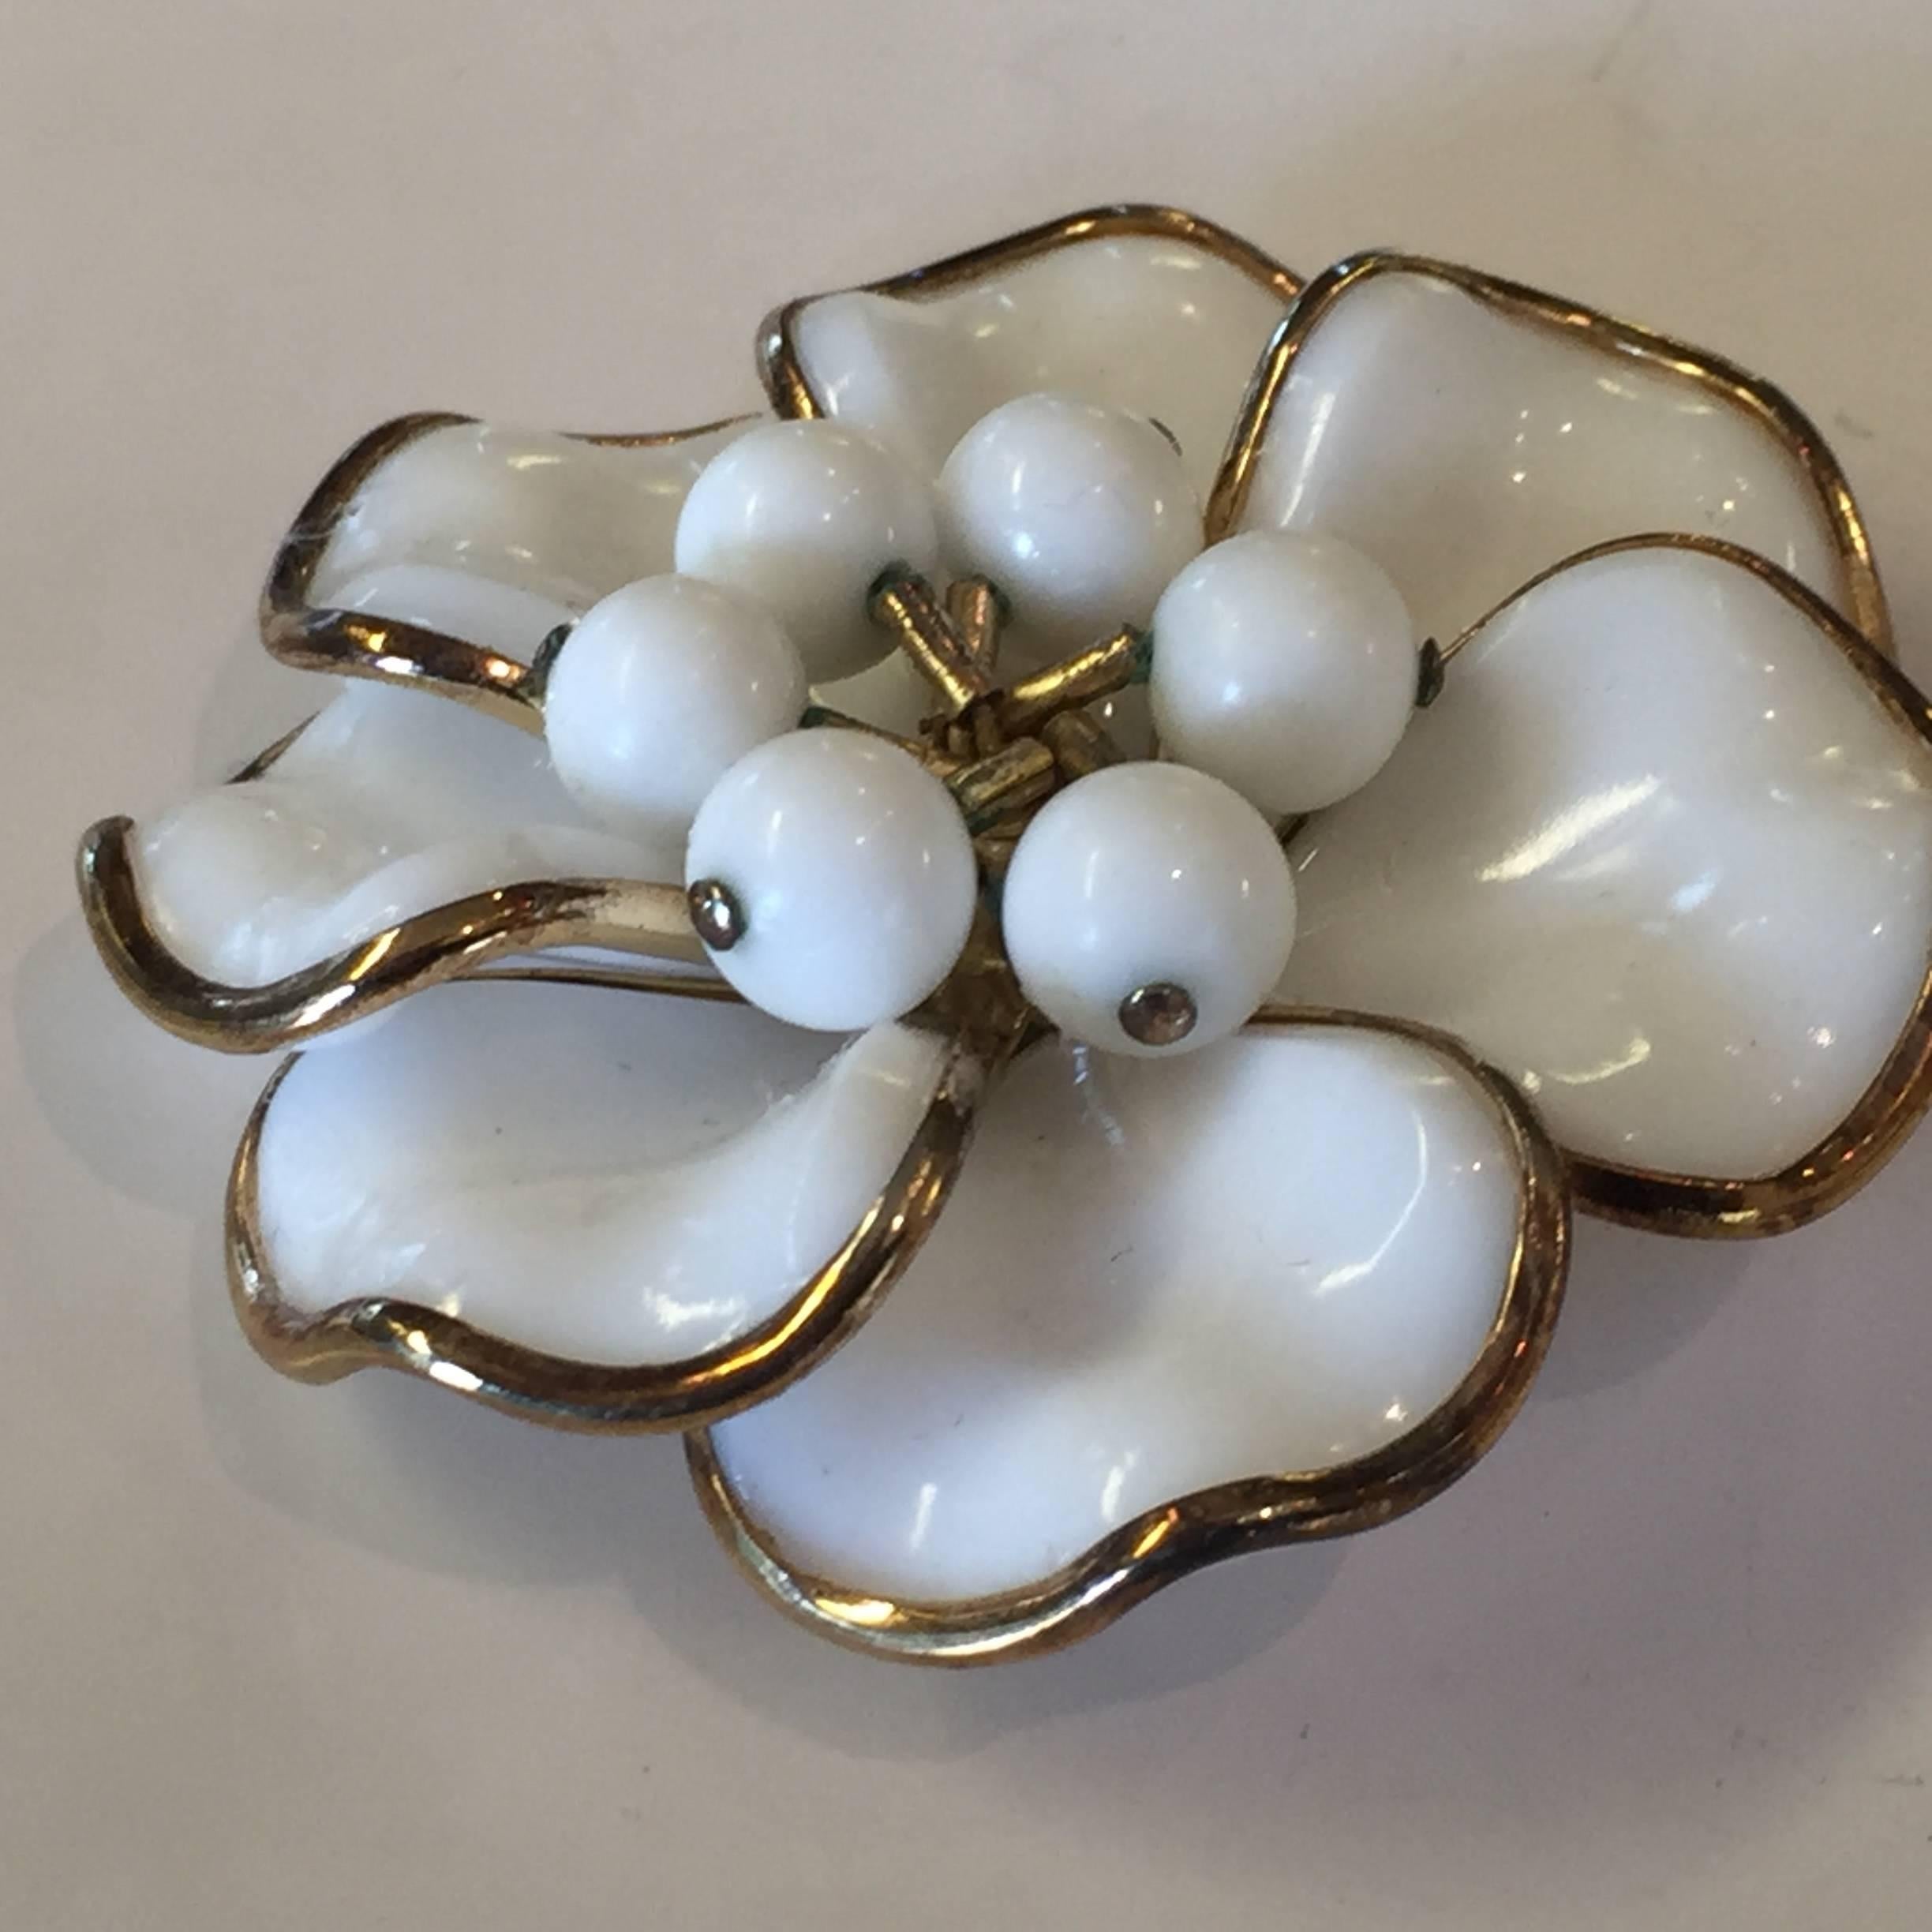 The simple elegance of milk glass is spotlighted in this 1950s TRIFARI Poured Milk Glass Bezel Set Circular Petalled Flower Pin Brooch. Each petal of the flower is individual , and set with a poured milk glass contoured  stone in a pinwheel design,